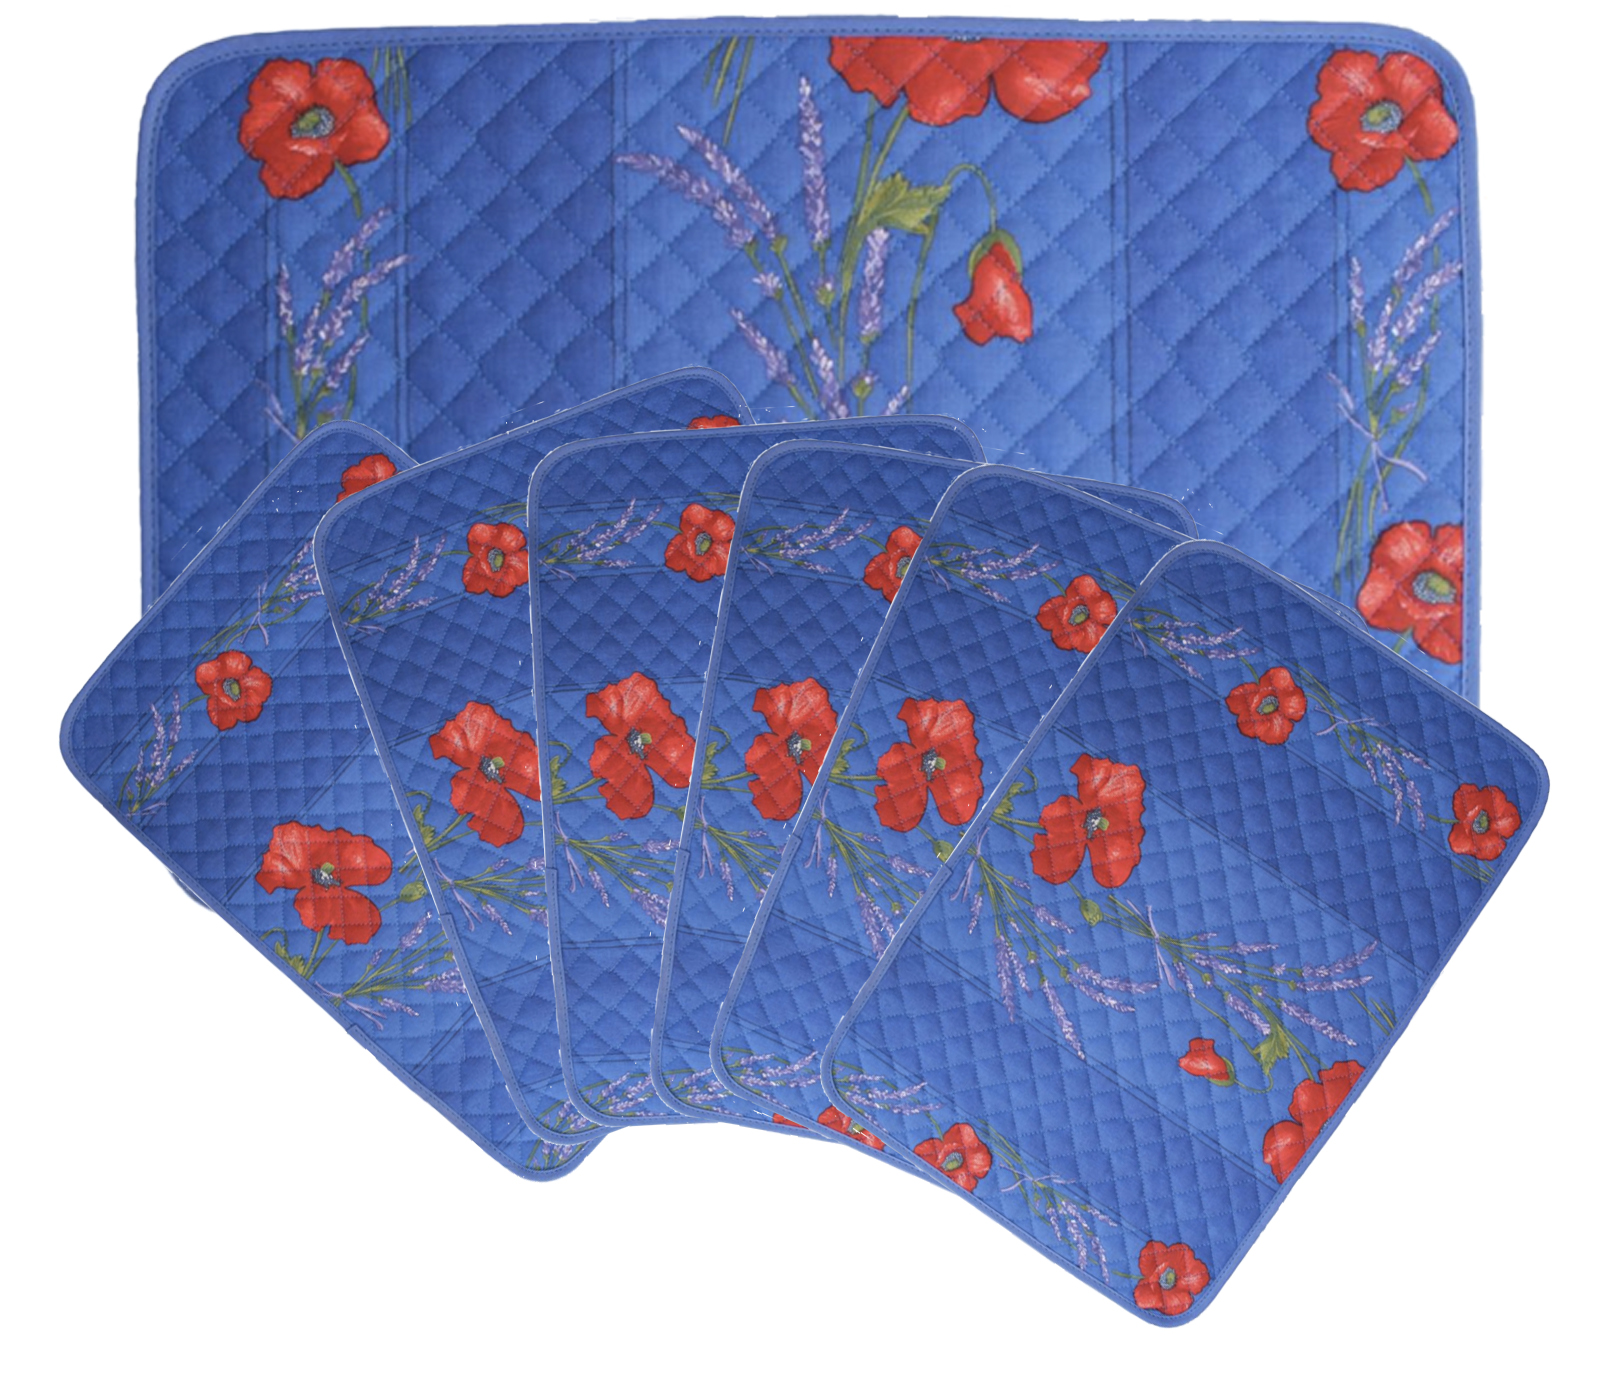 French Acrylic Coated Placemats Collection "Coquelicot" Blue: Poppies & Lavender Motif, Size 17" x 11", Price $94.95 for a Set of 6